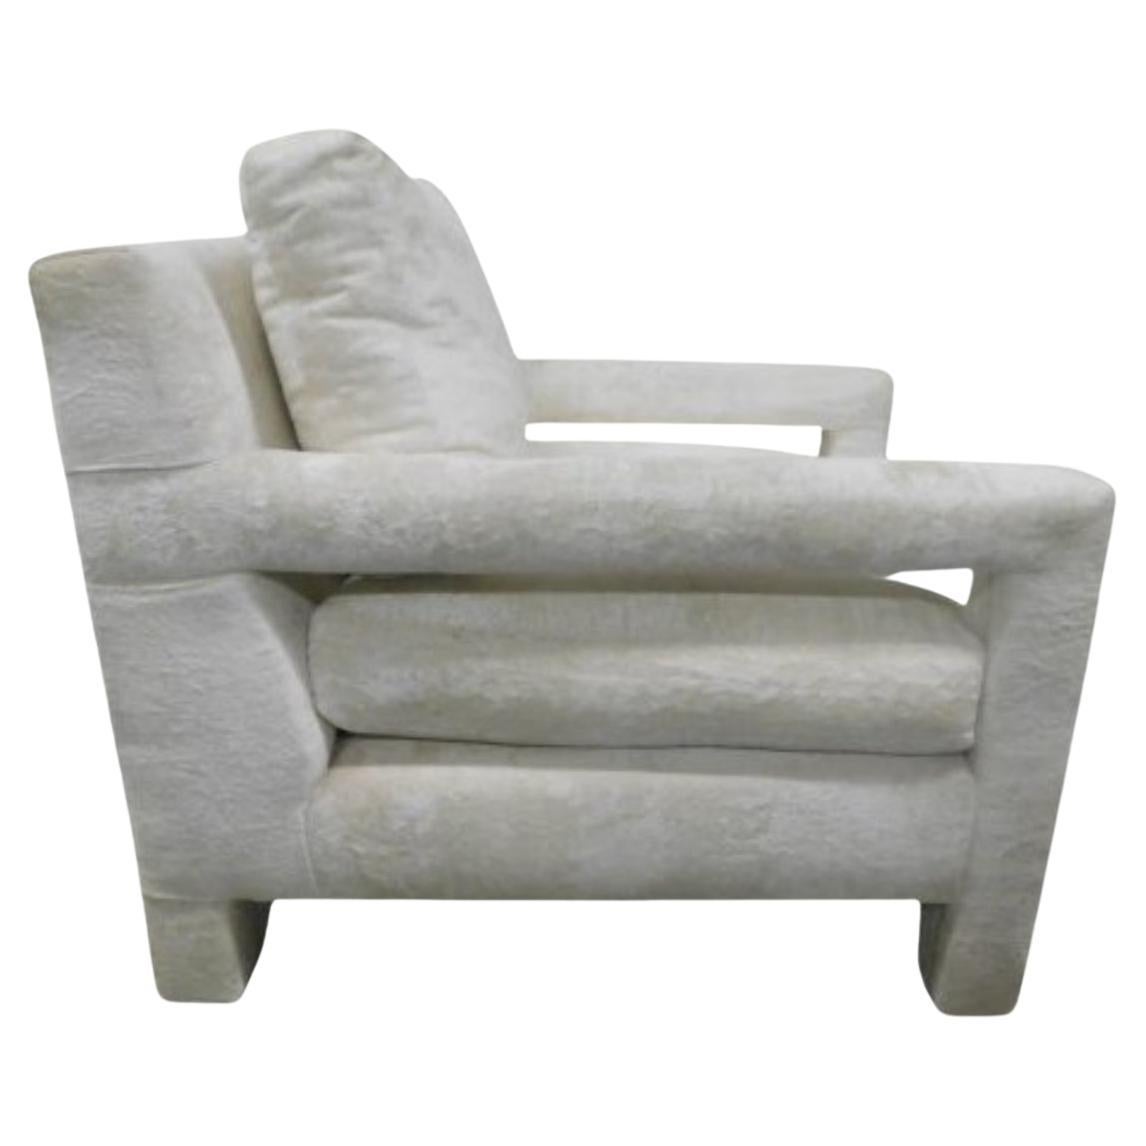 Mid century modern Milo Baughman Style Parson Chair & Ottoman. White Crushed velvet upholstery in good vintage condition. Ready for use. Located in Brooklyn NYC.

Dimensions: 
Chair 33” deep x 29” wide x 28” tall - SH 16”
Ottoman 30” x 24” x 17”